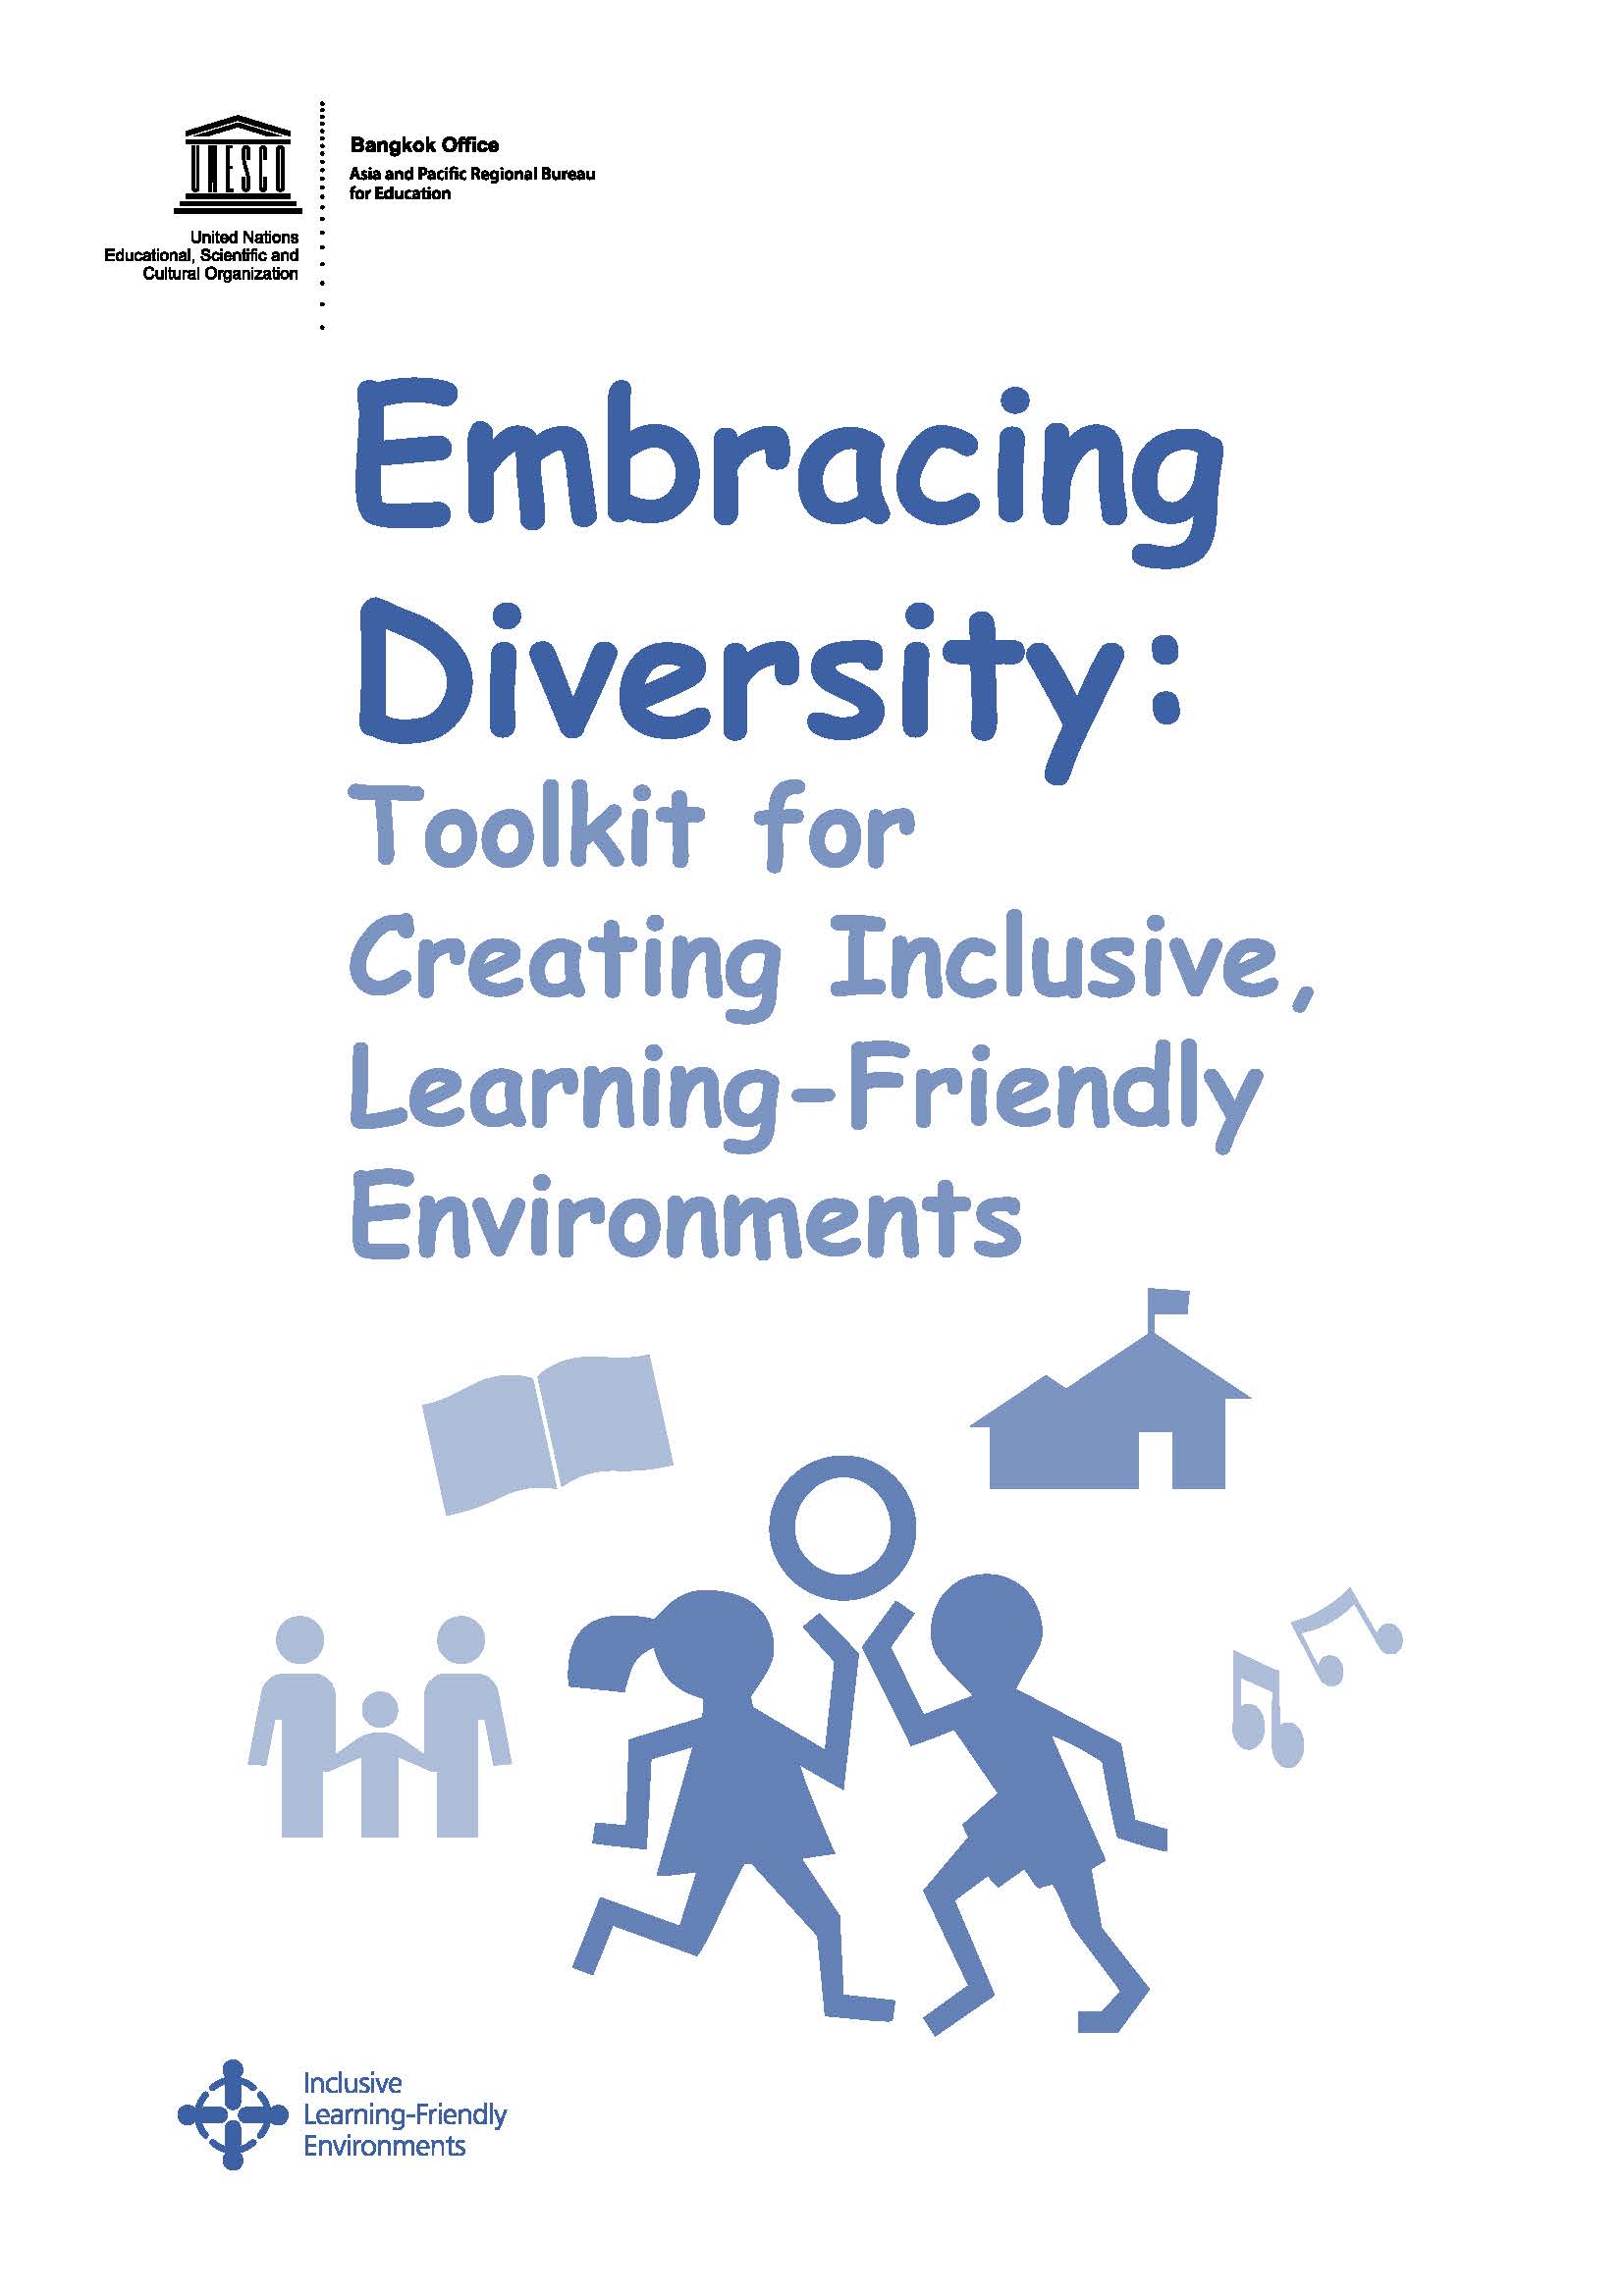 Embracing diversity toolkit for creating inclusive, learning-friendly environments